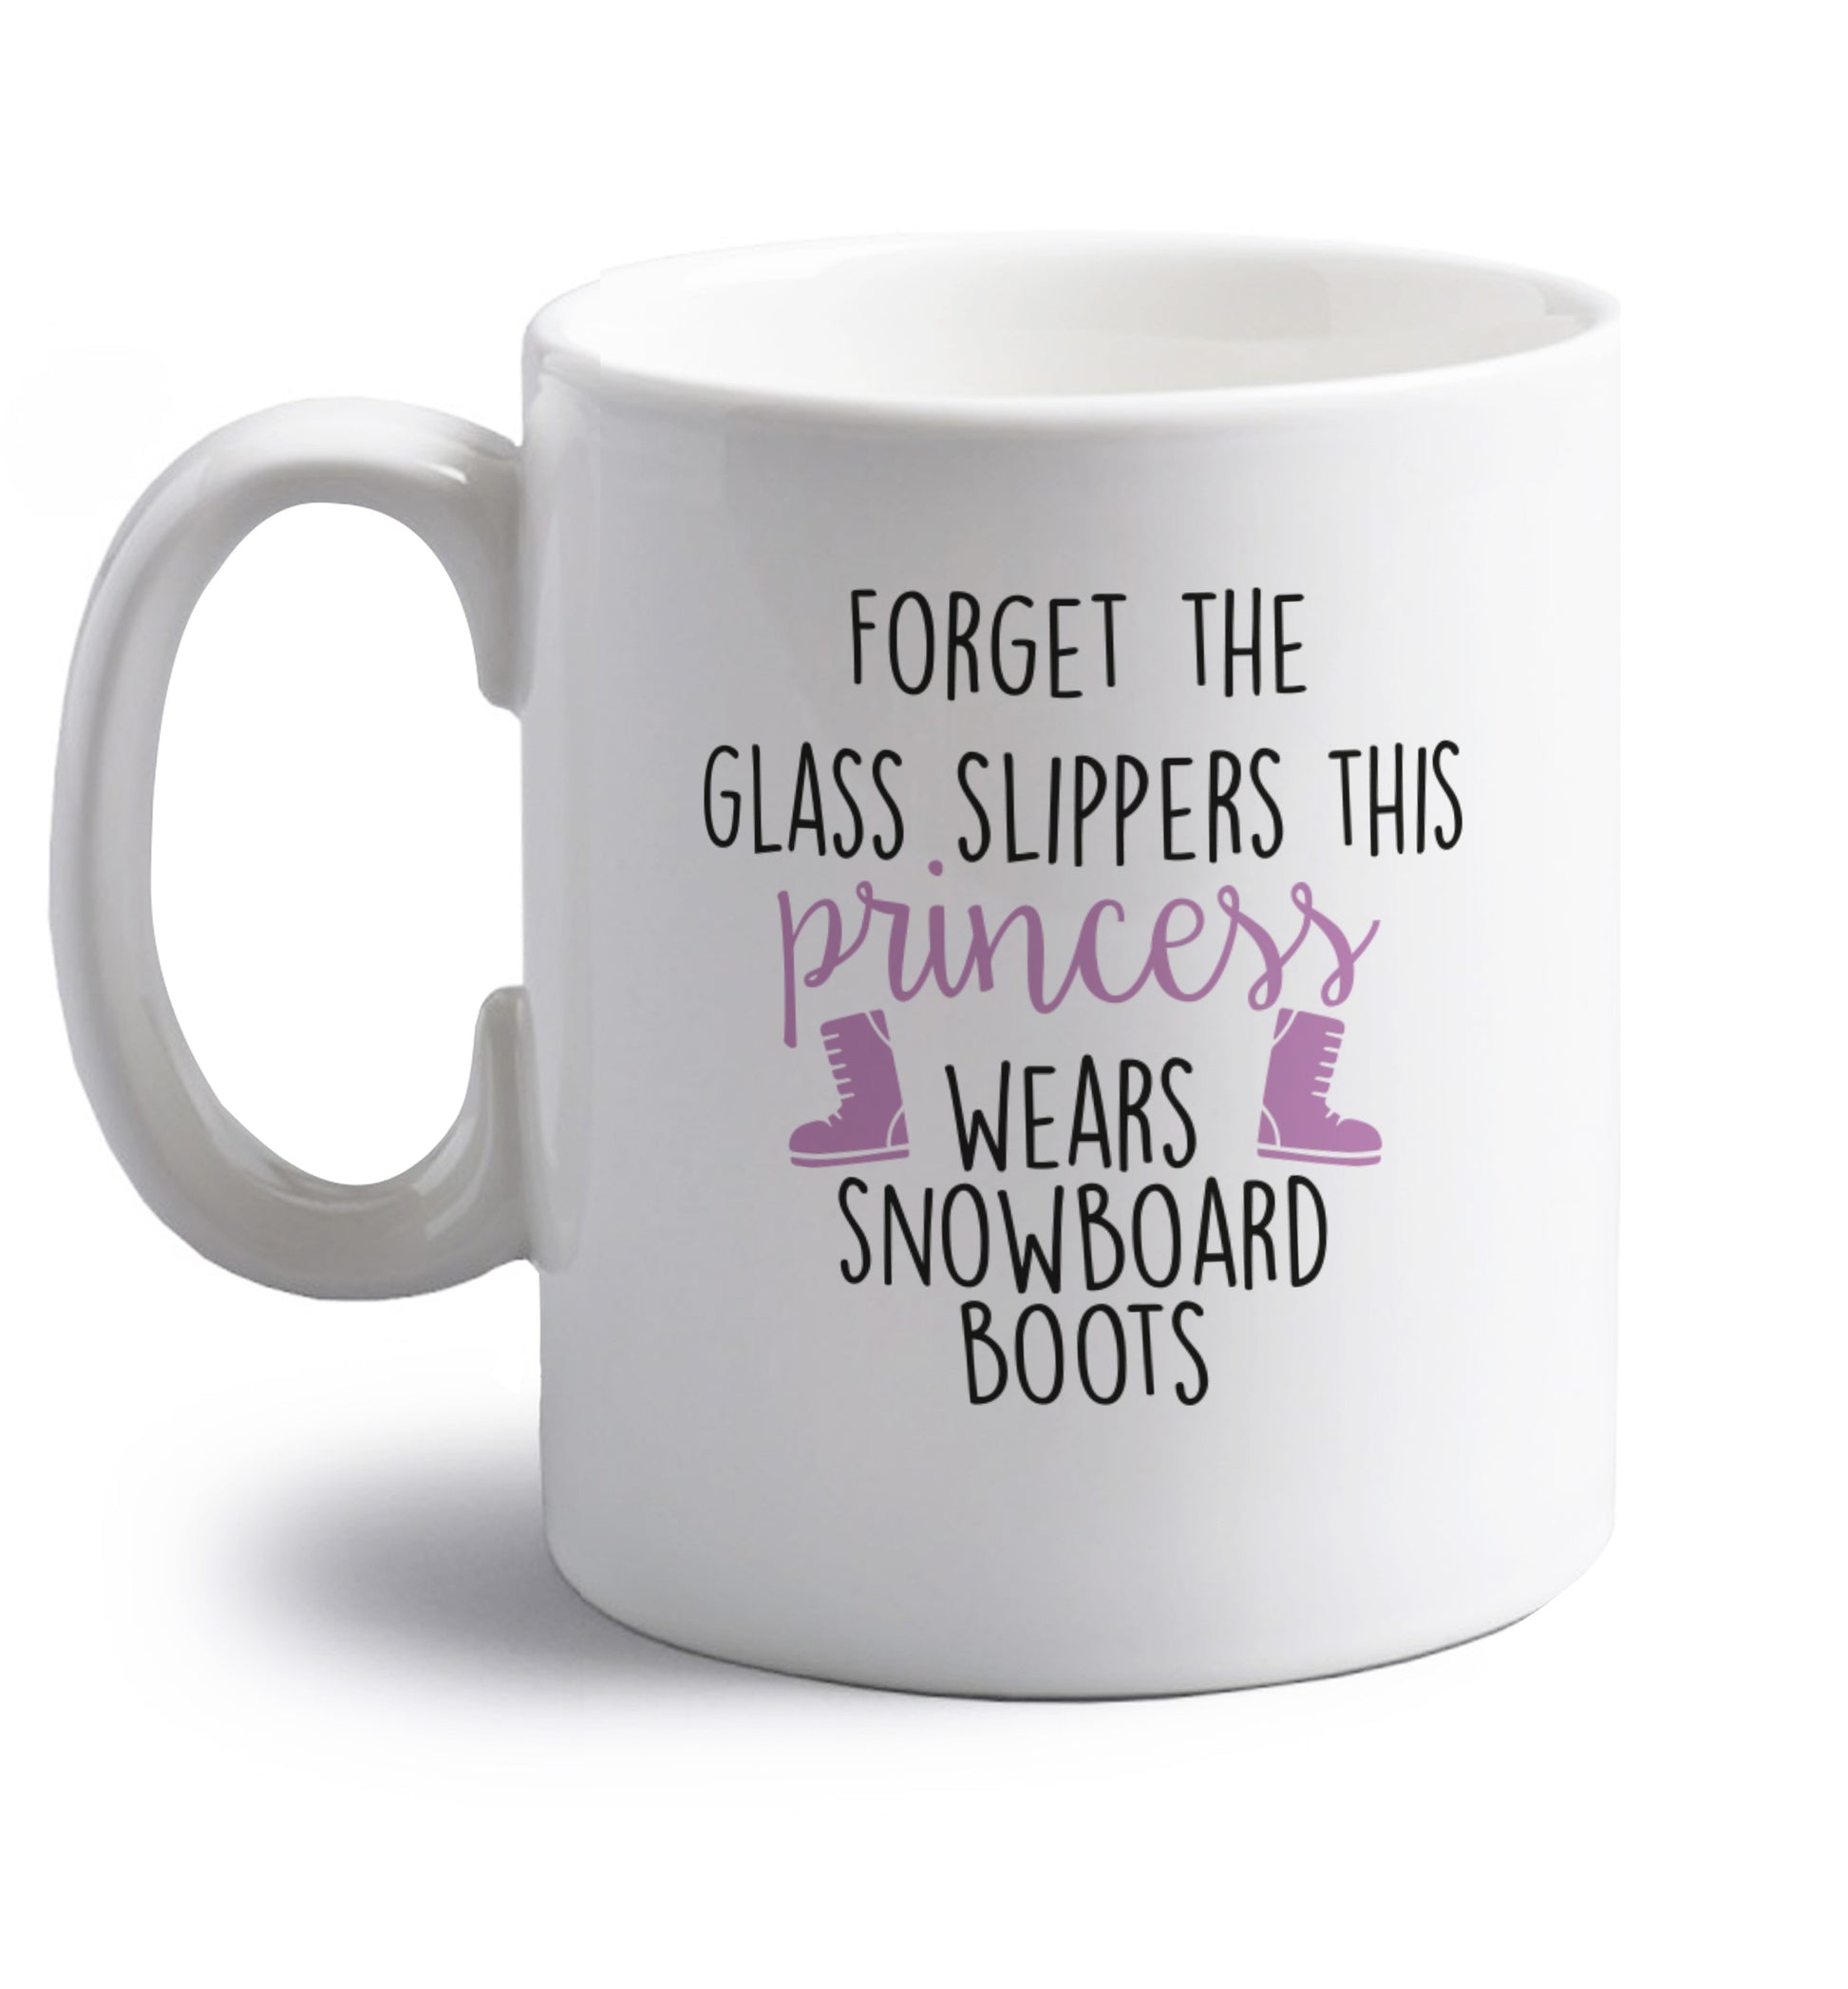 Forget the glass slippers this princess wears snowboard boots right handed white ceramic mug 